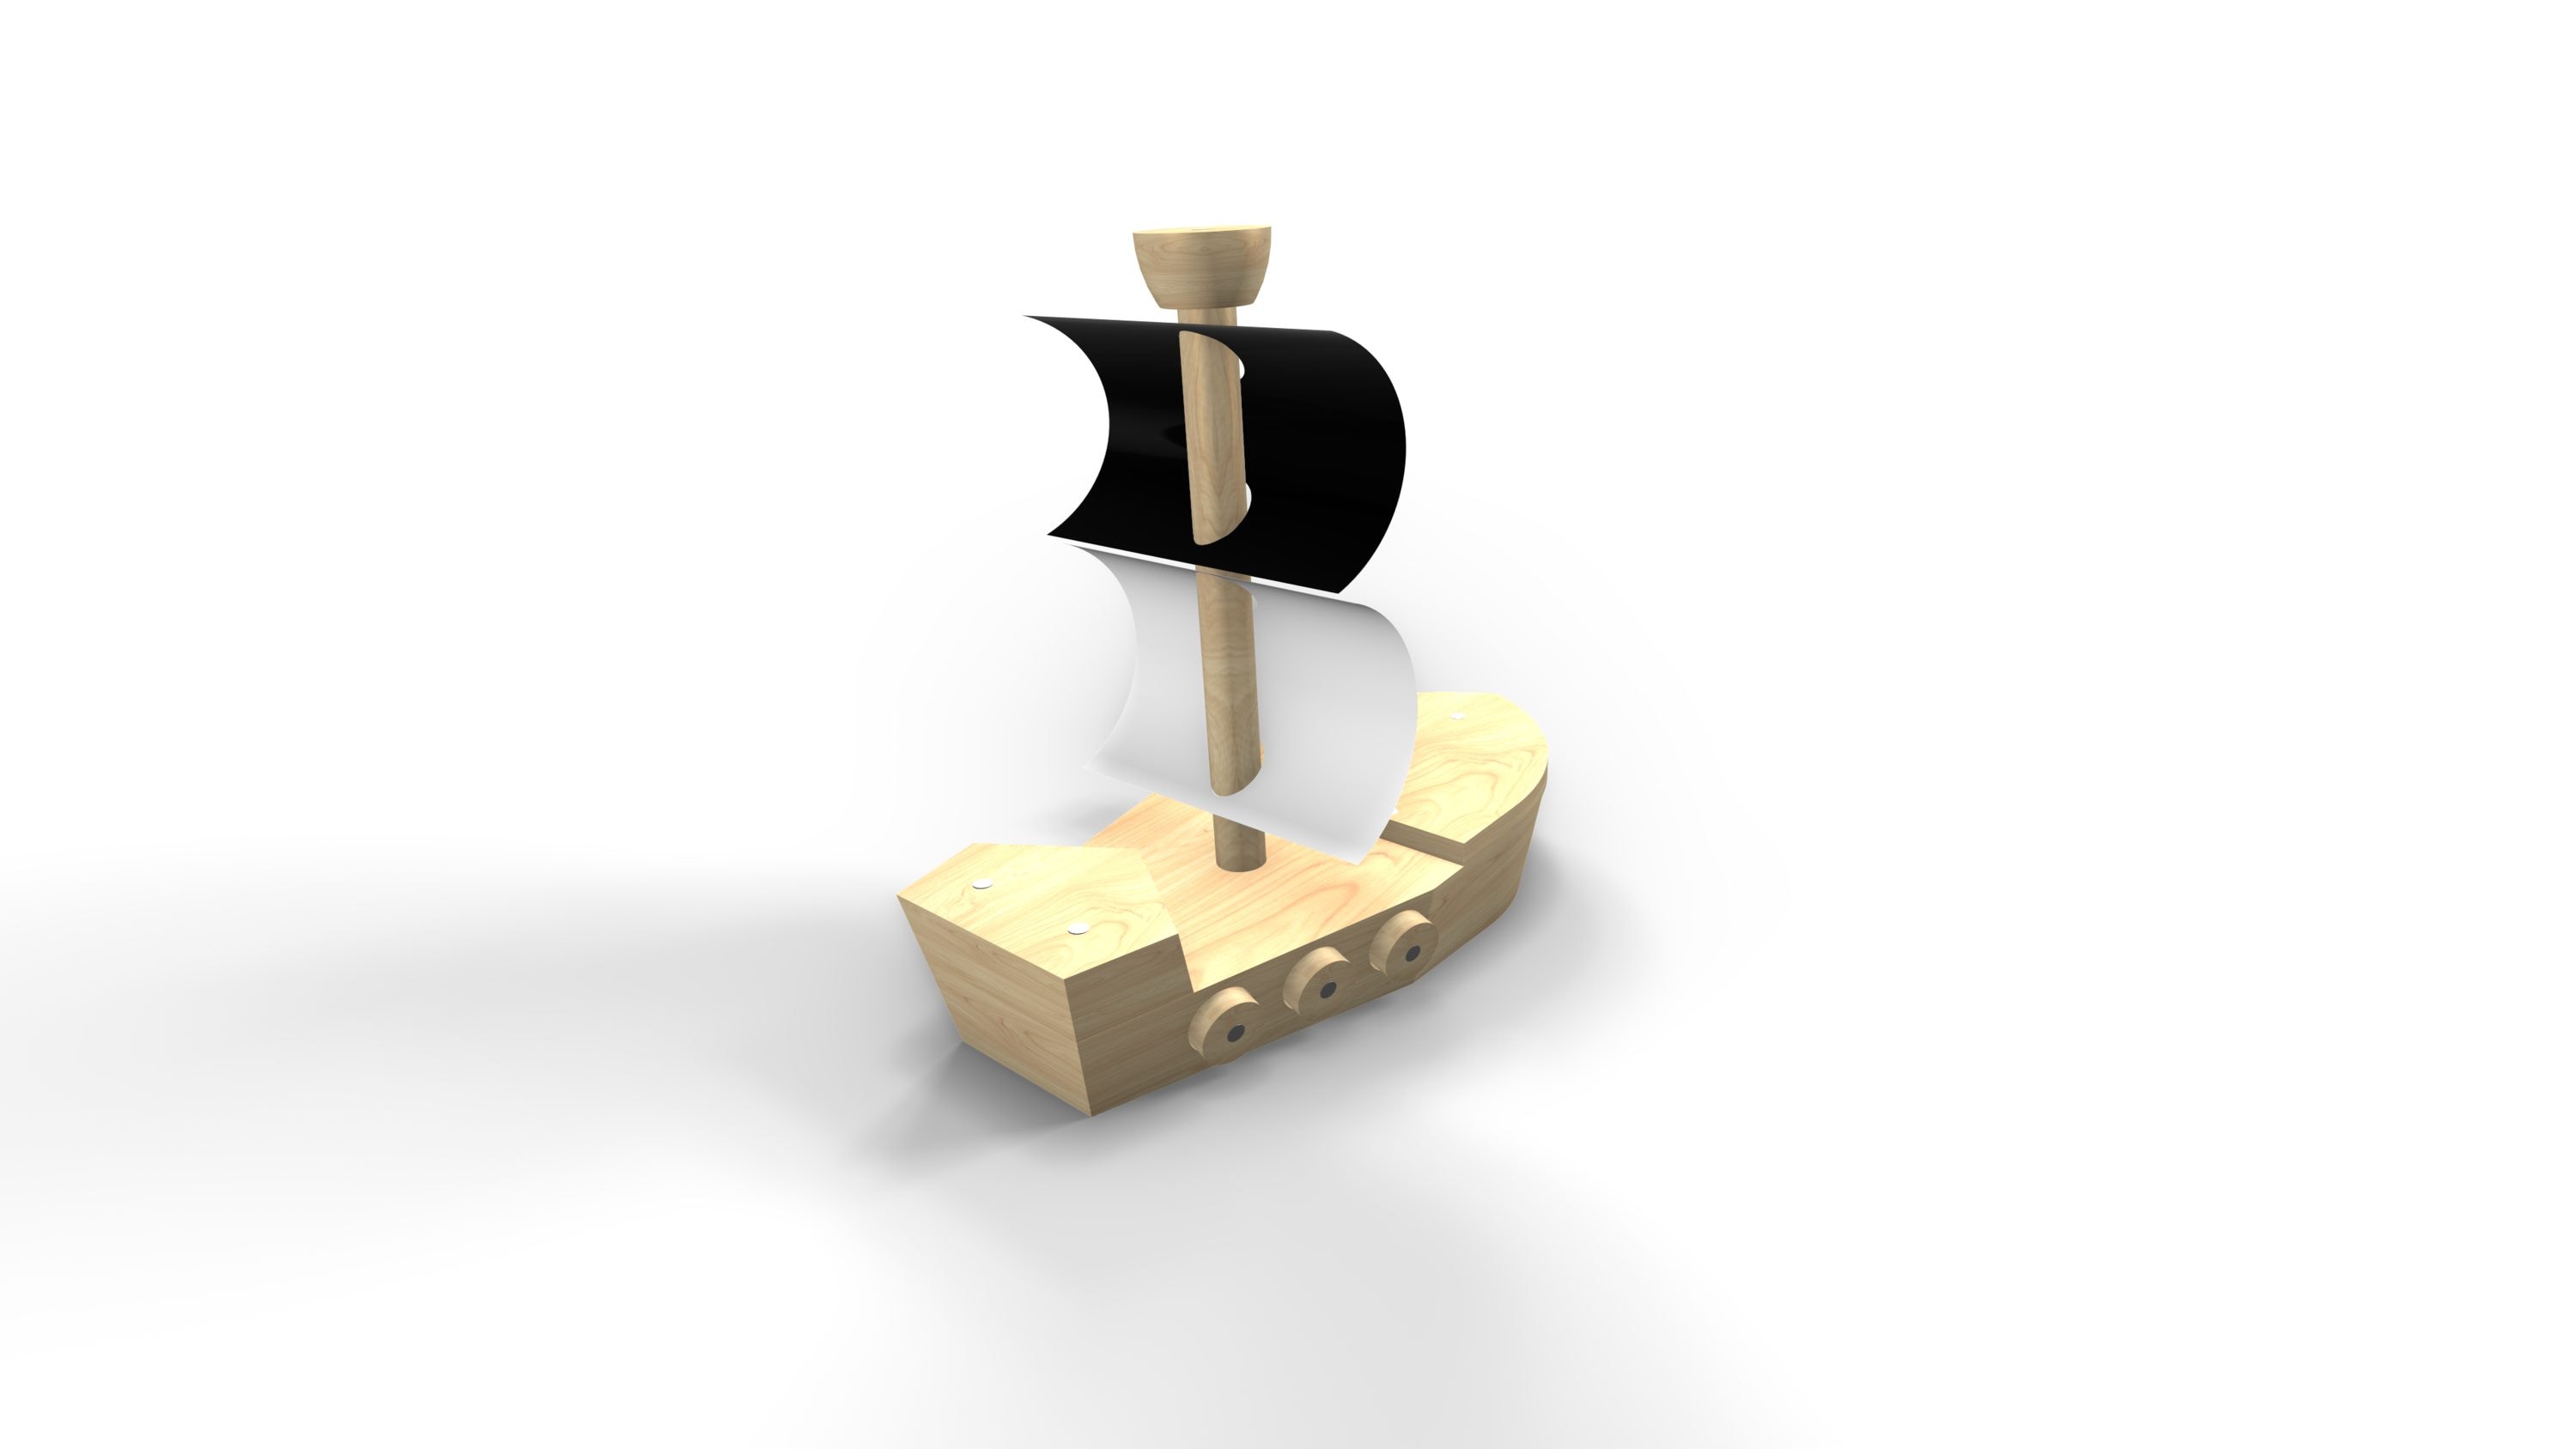 3D model Pirate Ship Wheel 07 - Clear Wood - Helm Interior Parts